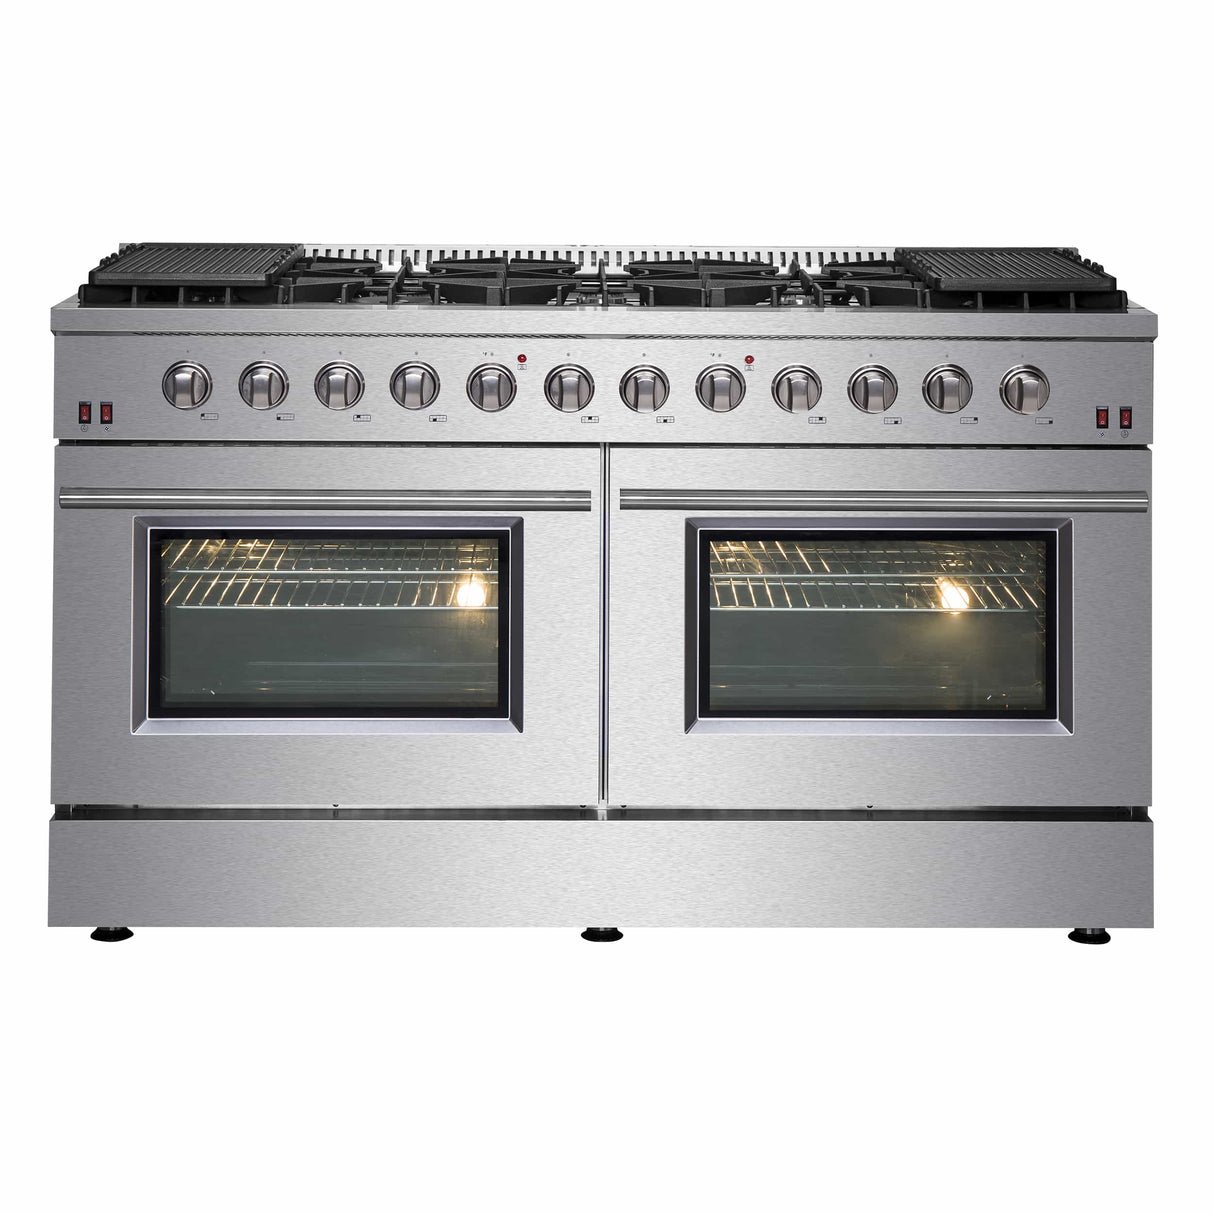 Forno Galiano 60-Inch Gas Range with 10 Burners in Stainless Steel (FFSGS6244-60)